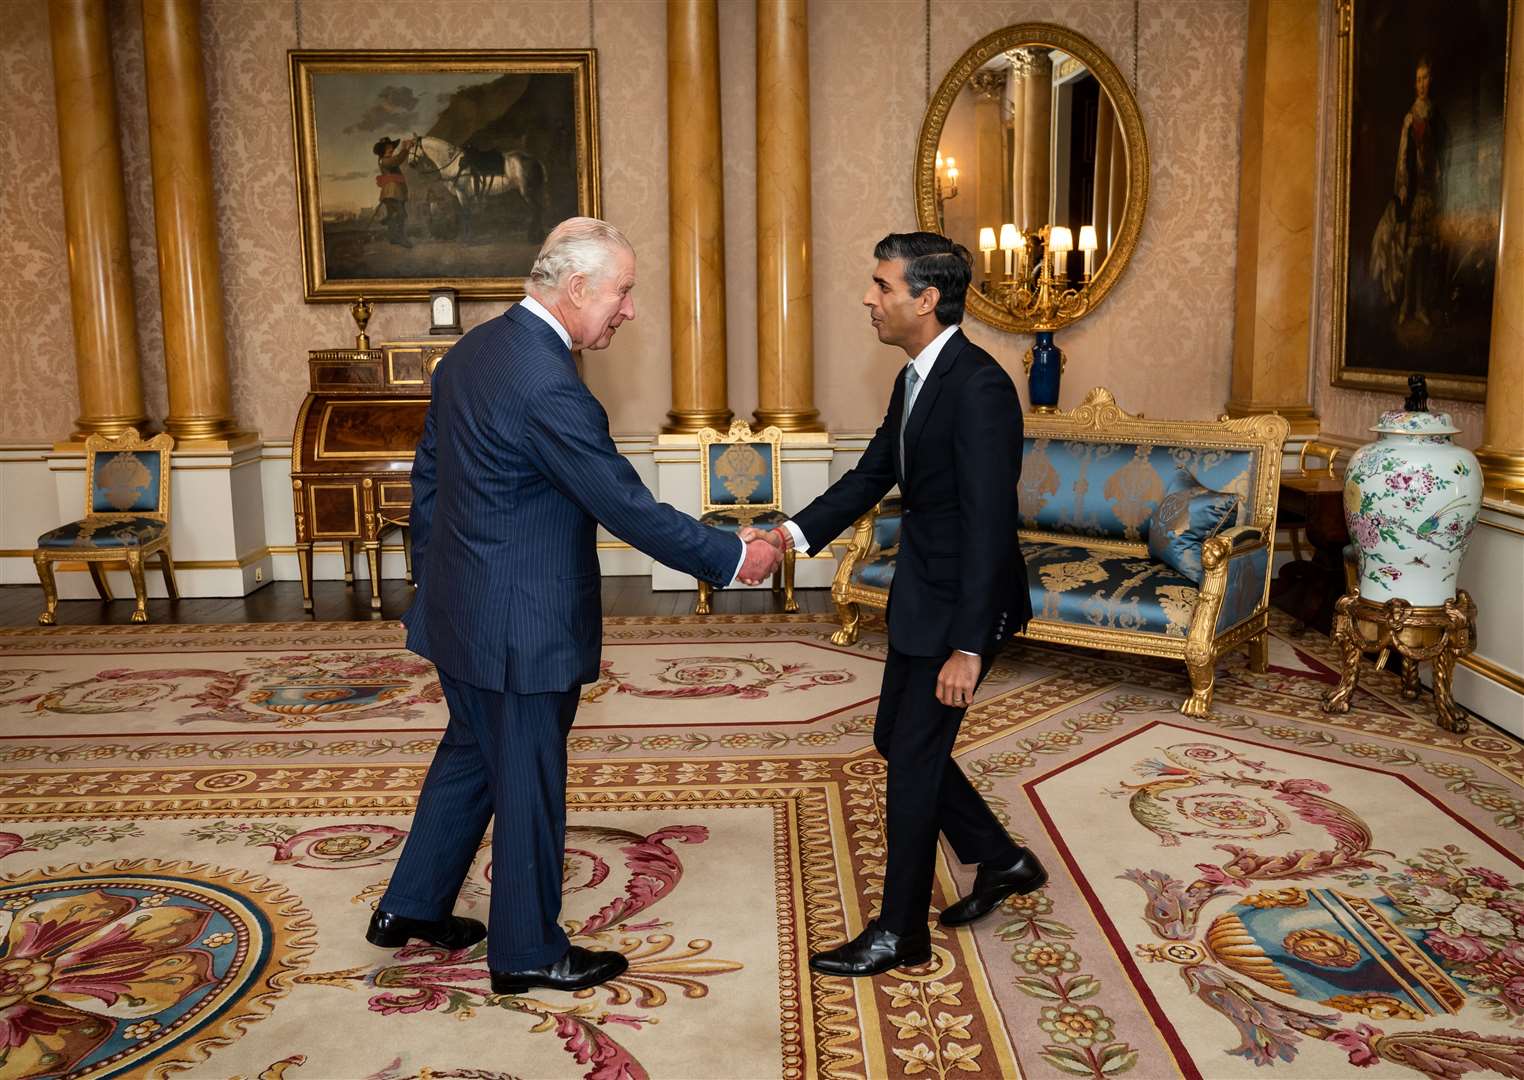 The King welcomes Rishi Sunak during an audience at Buckingham Palace, where he invited the newly-elected leader of the Conservative Party to become Prime Minister and form a new government (Aaron Chown/PA)